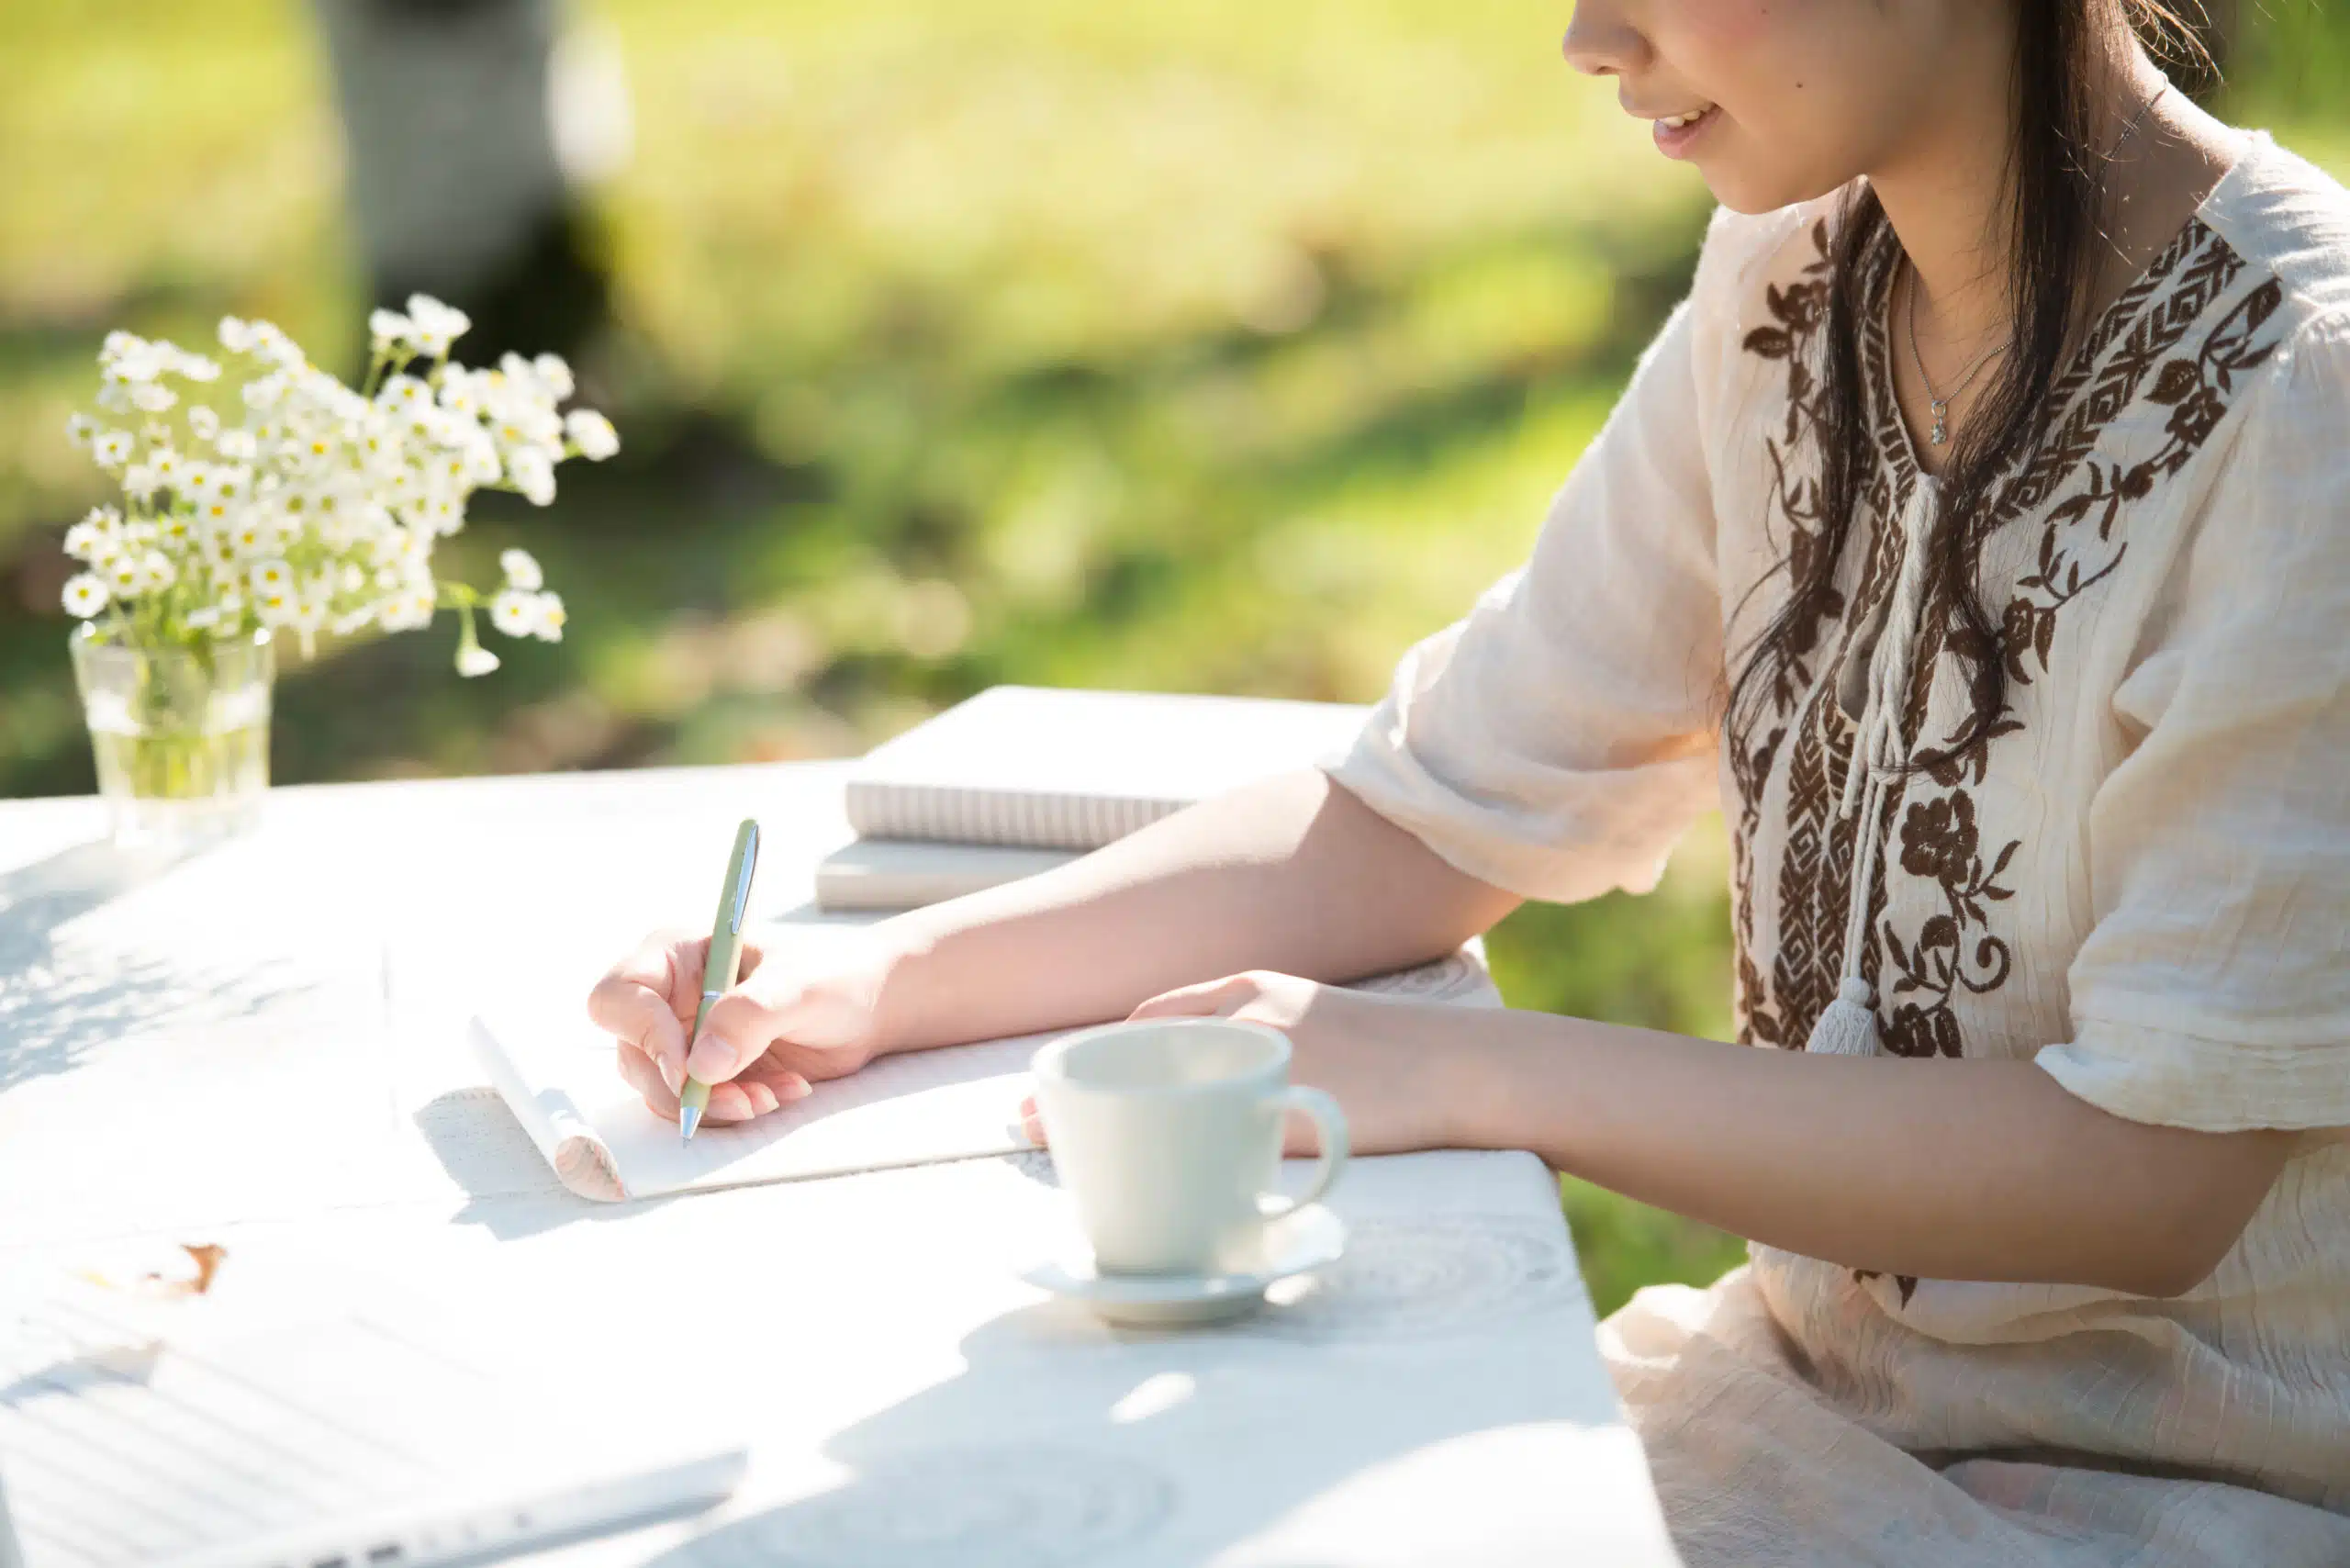 Japanese girl writing outdoor ion nature.